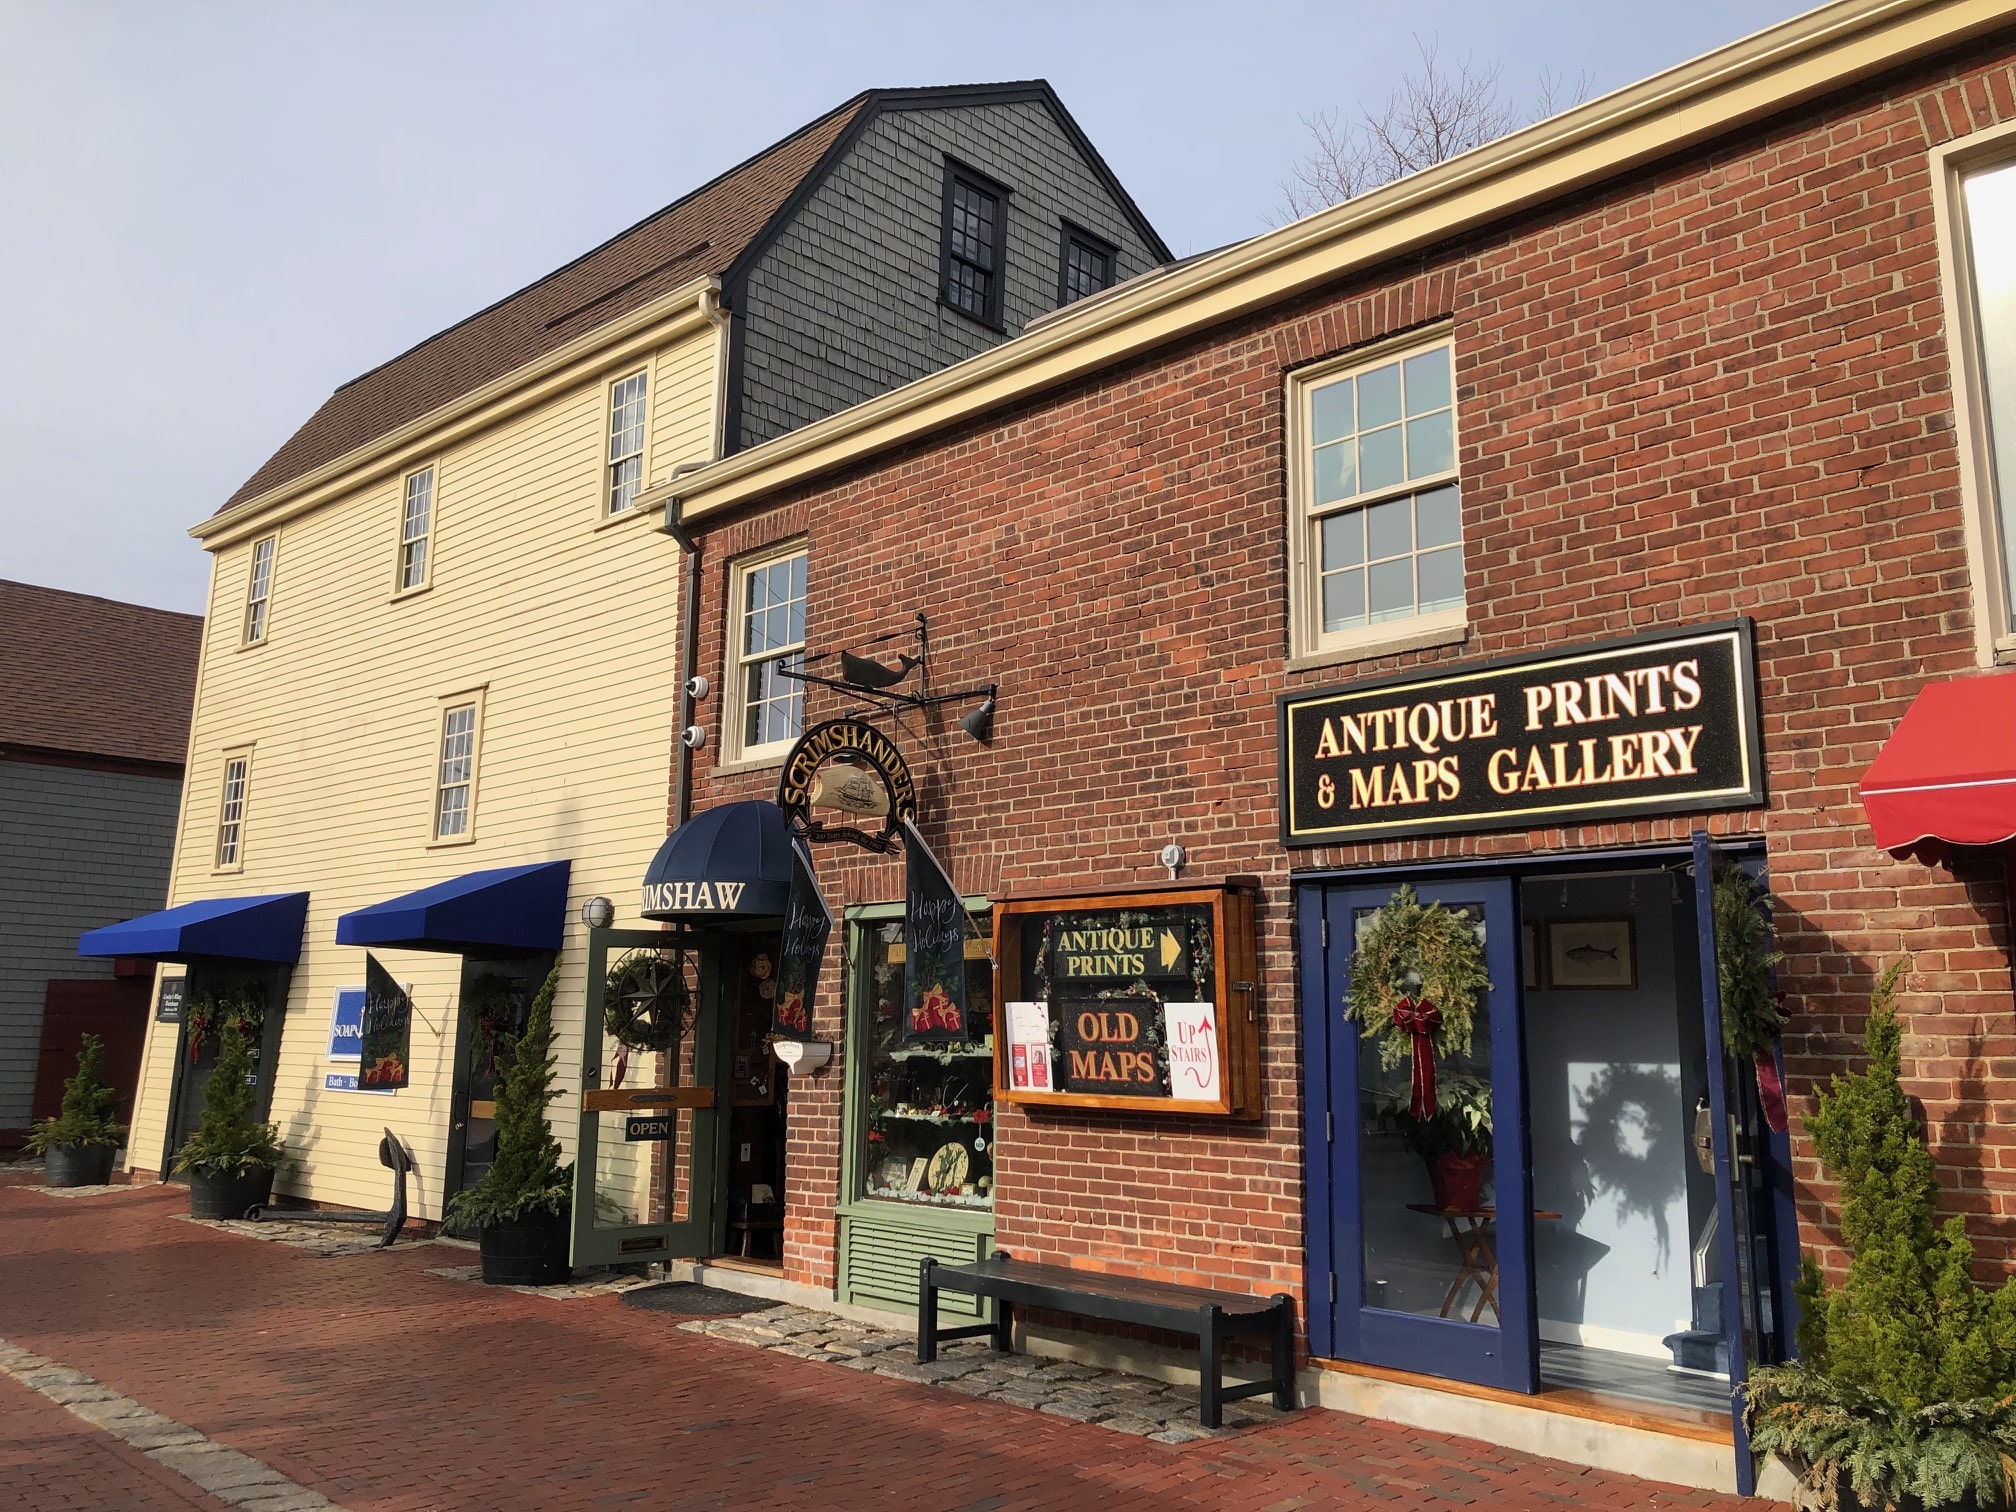 Visit our specialized, Newport antiques gallery. It is located upstairs, on historic Bowen's Wharf. Look for  signs: Antique Prints and Maps Gallery. Explore geography though old maps. Learn about antique prints over 100 years old. 